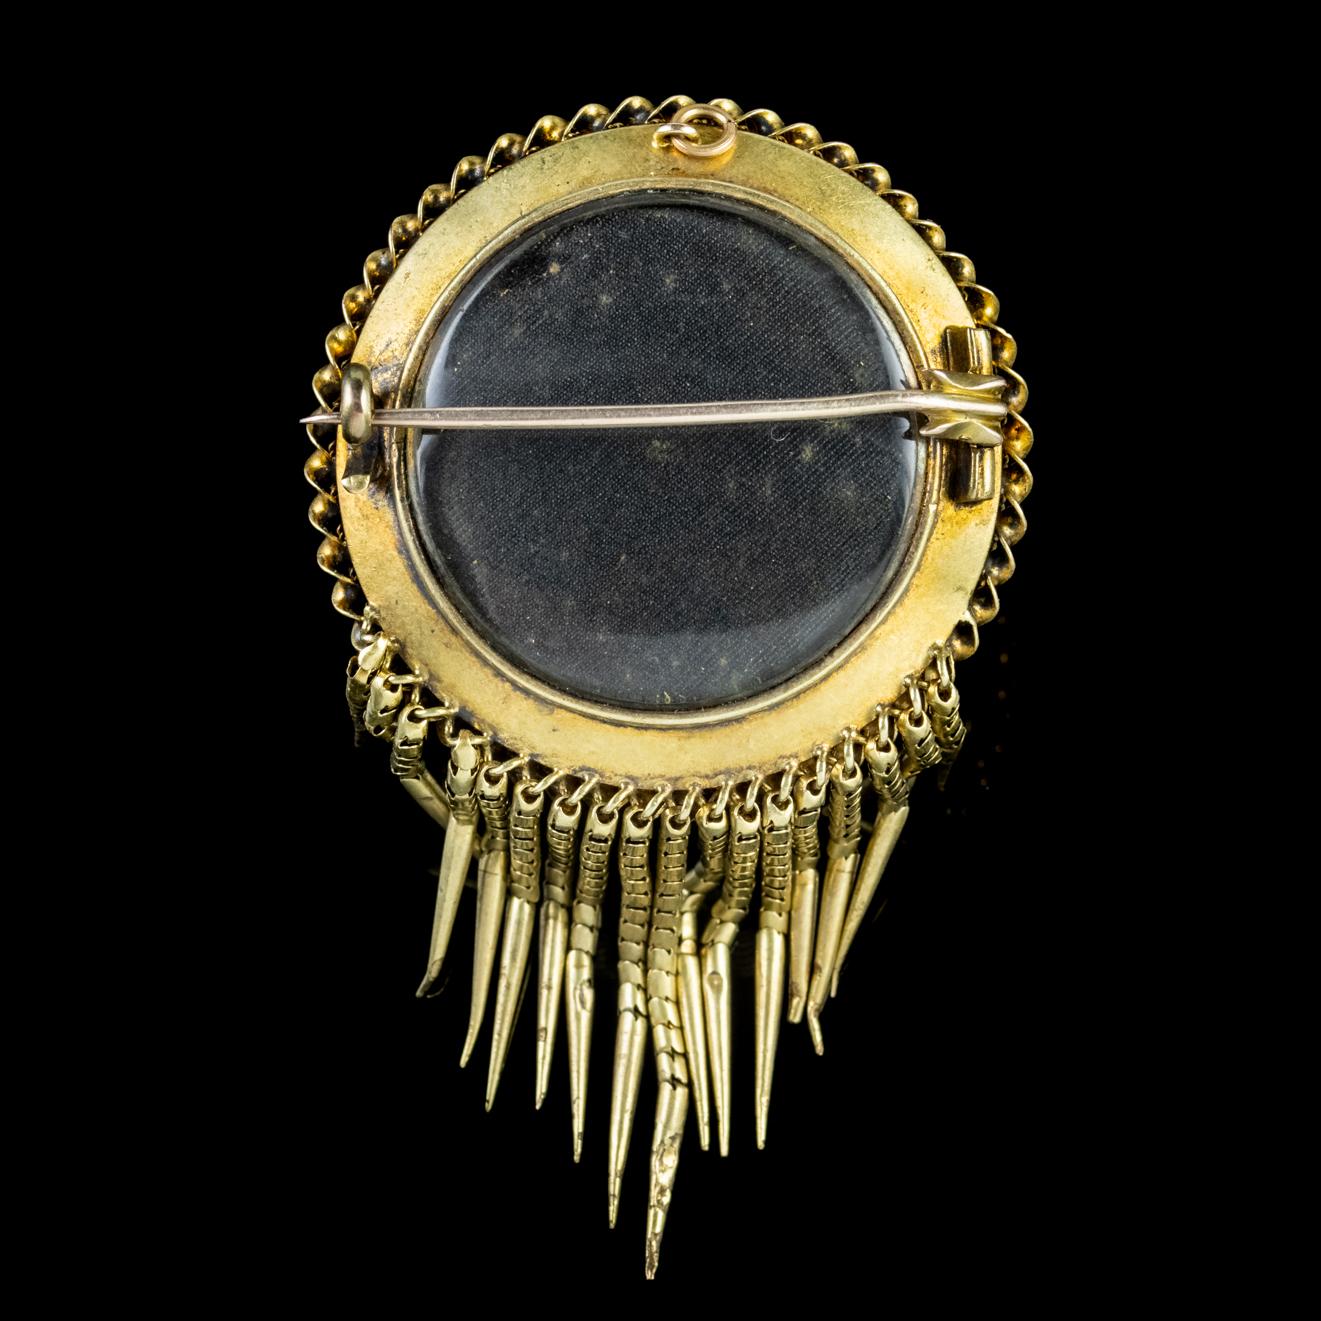 A highly unique Victorian Etruscan revival brooch decorated with beautiful Turquoise stones and crowned with a wonderful dome in the centre with a star set Diamond on top.

Etruscan revival pieces were crafted in the mid 1800s when ancient Etruscan